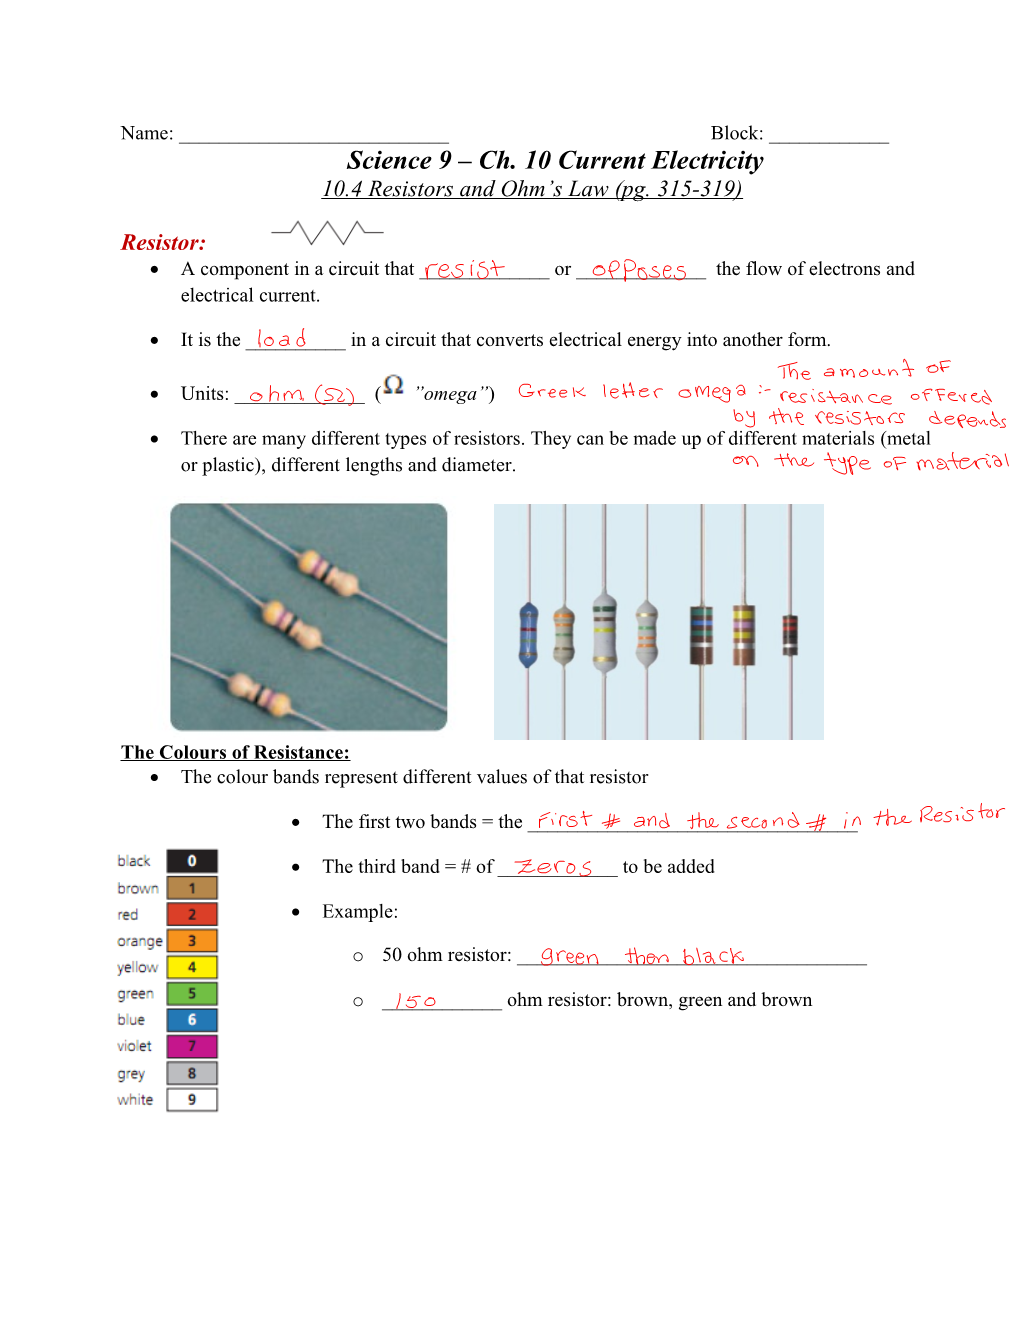 Science 9 Ch. 10 Current Electricity